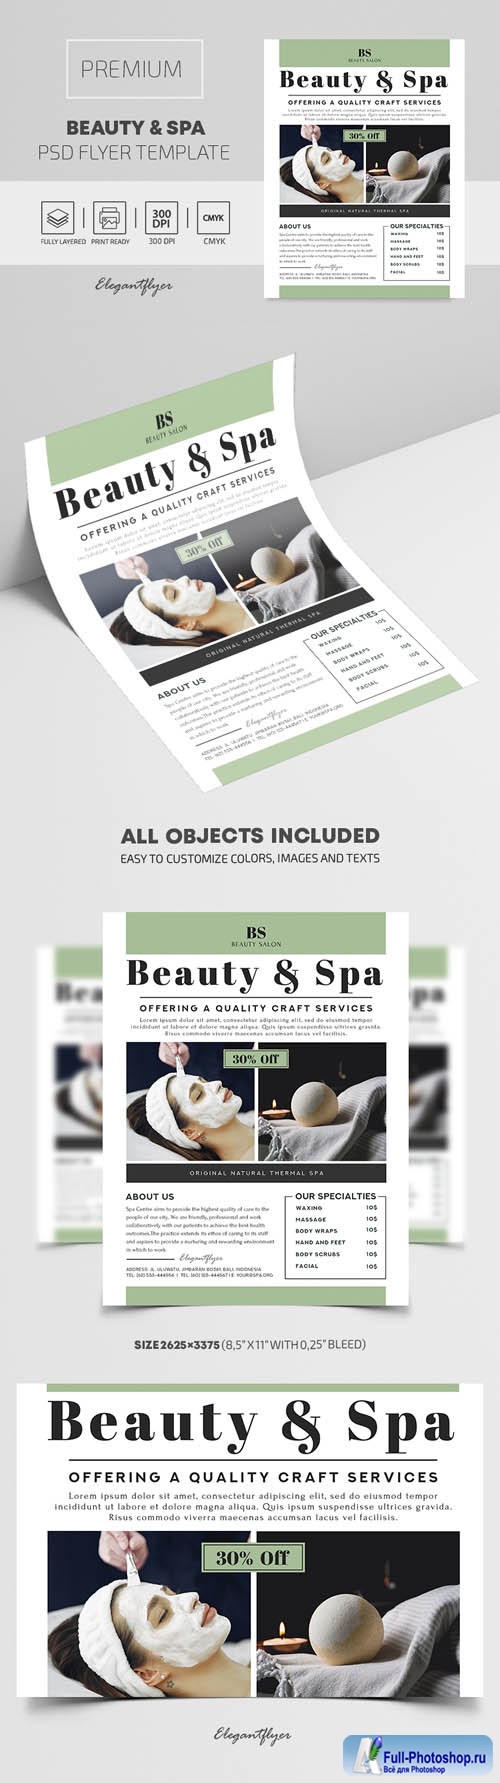 Beauty and Spa Premium PSD Flyer Template